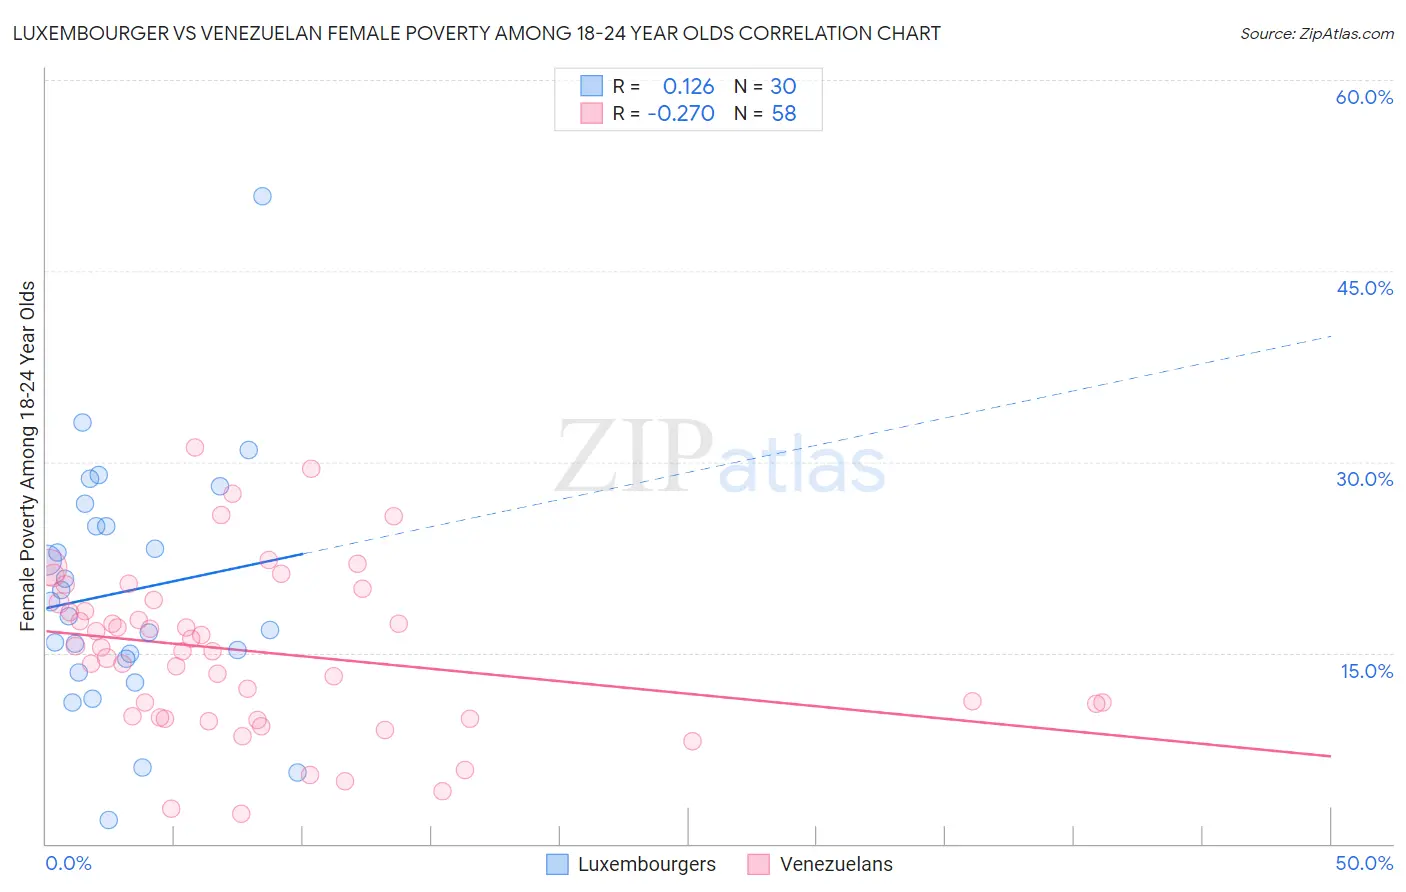 Luxembourger vs Venezuelan Female Poverty Among 18-24 Year Olds